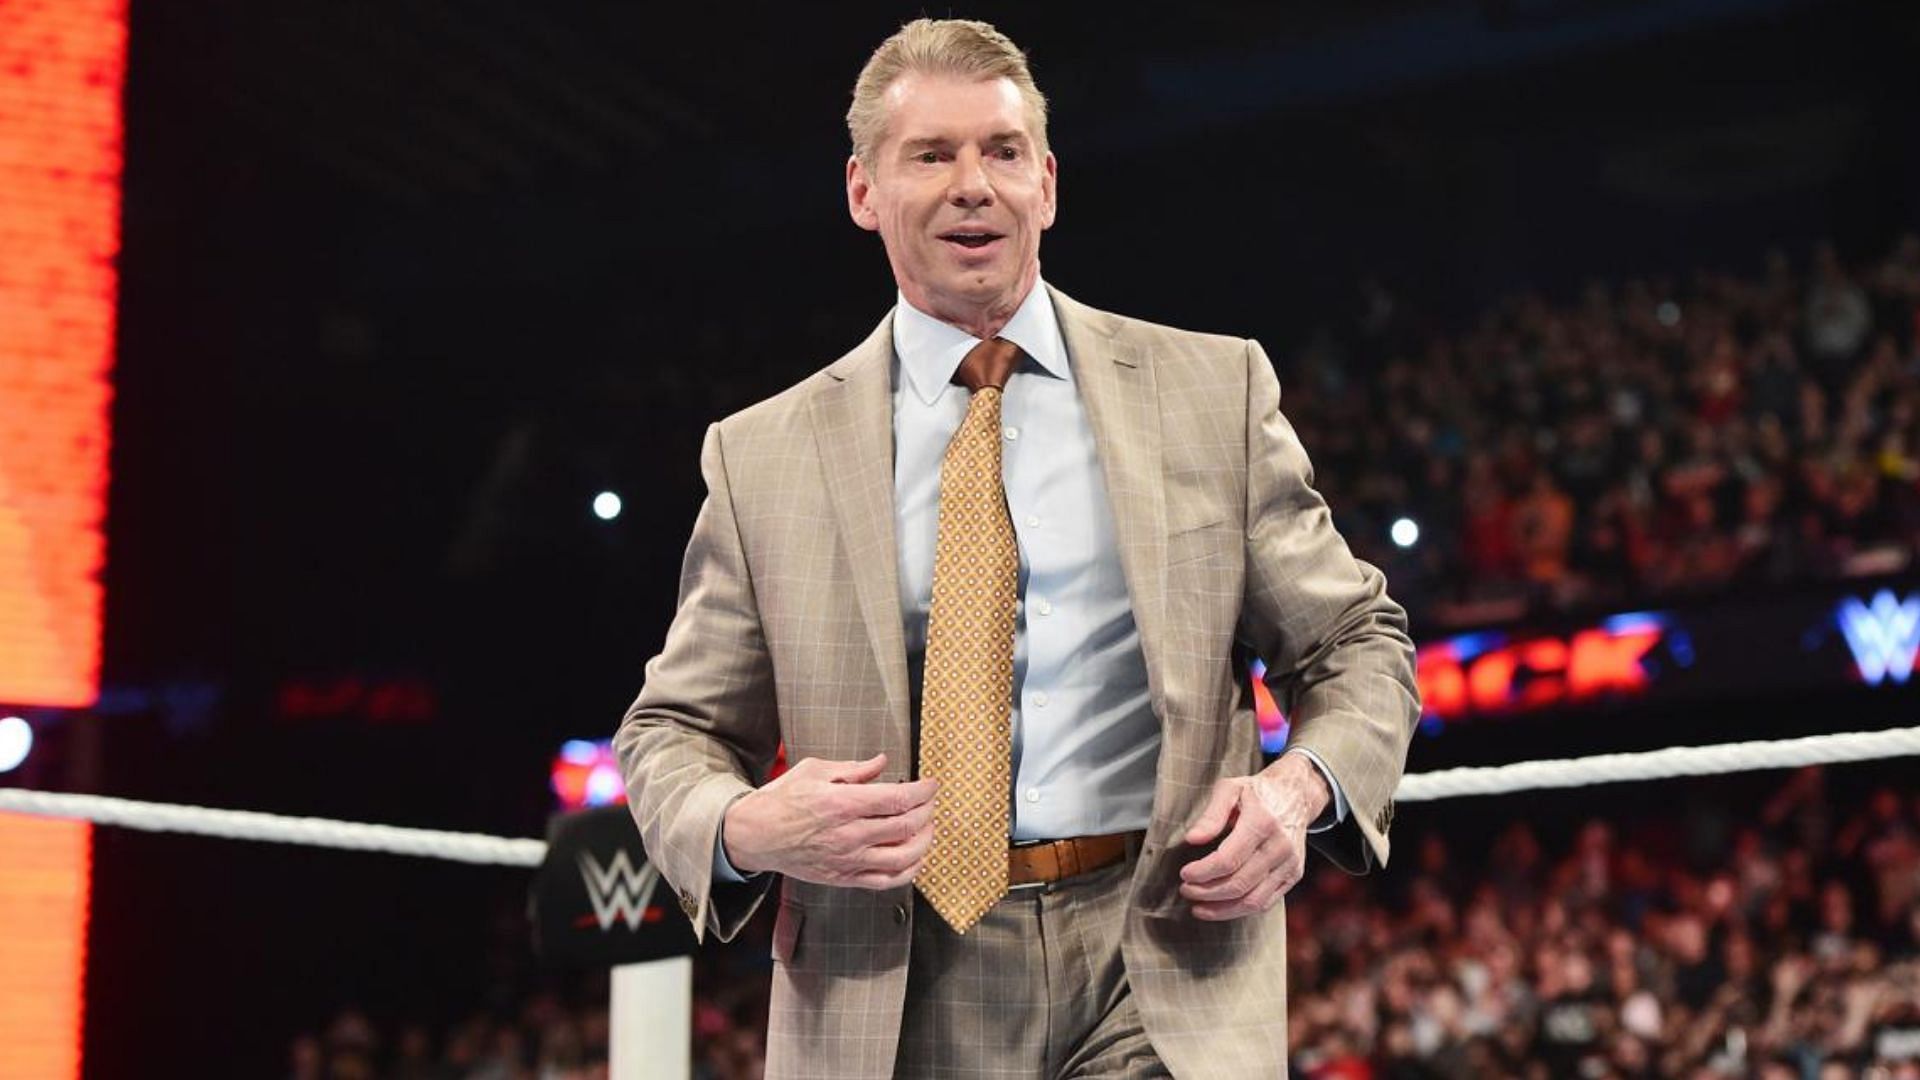 Vince McMahon loved WWE star